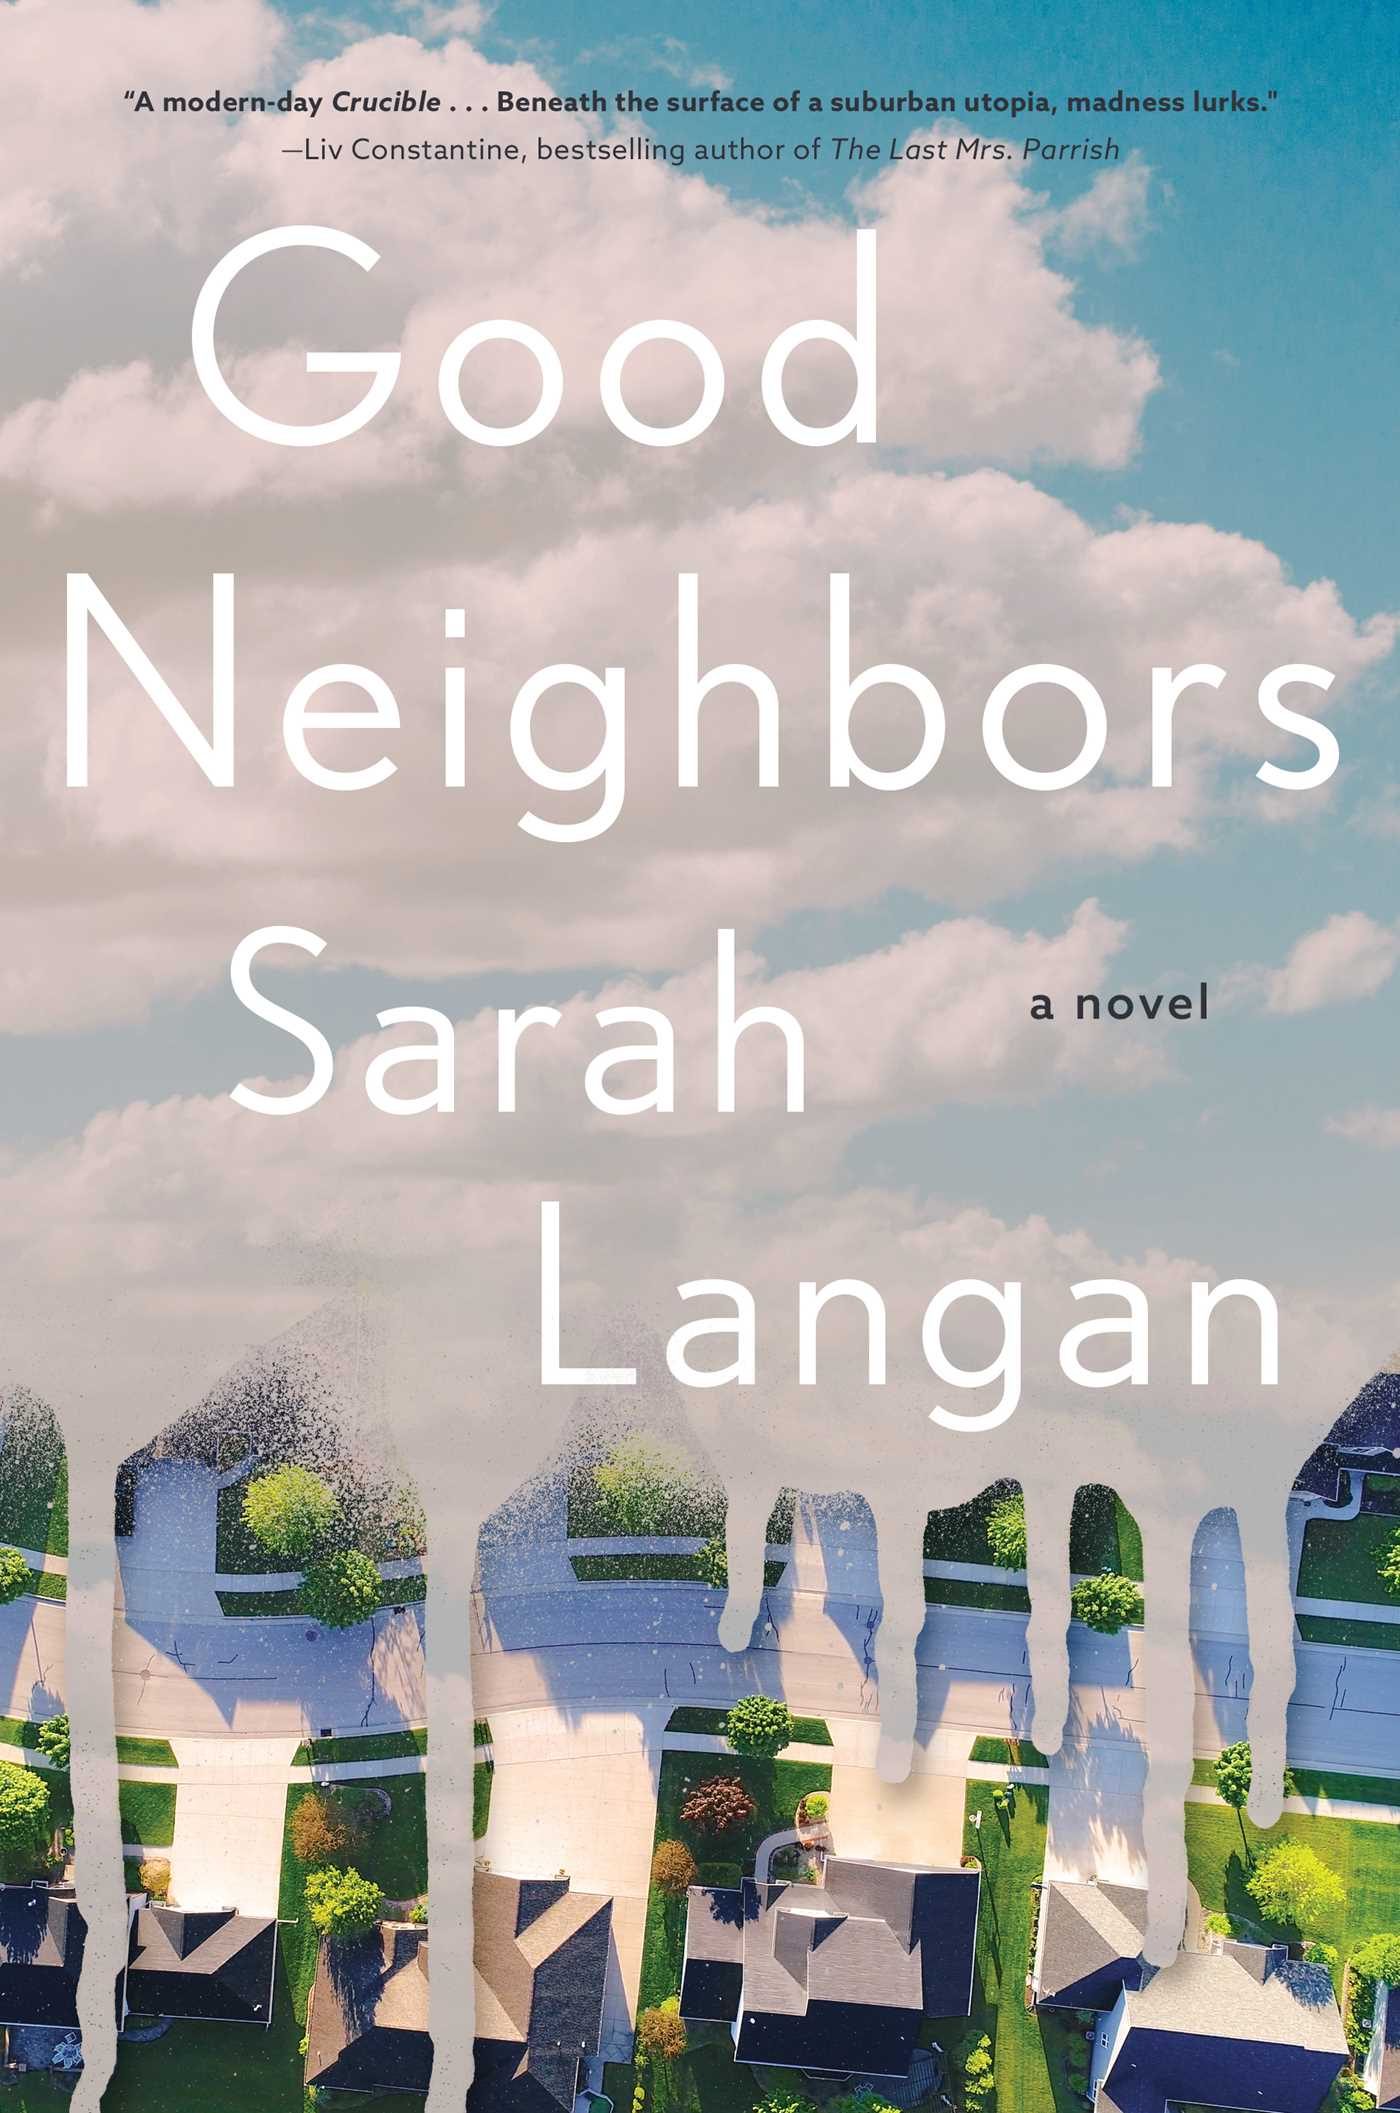 When Will Good Neighbors By Sarah Langan Come Out? 2021 Mystery Thriller Releases